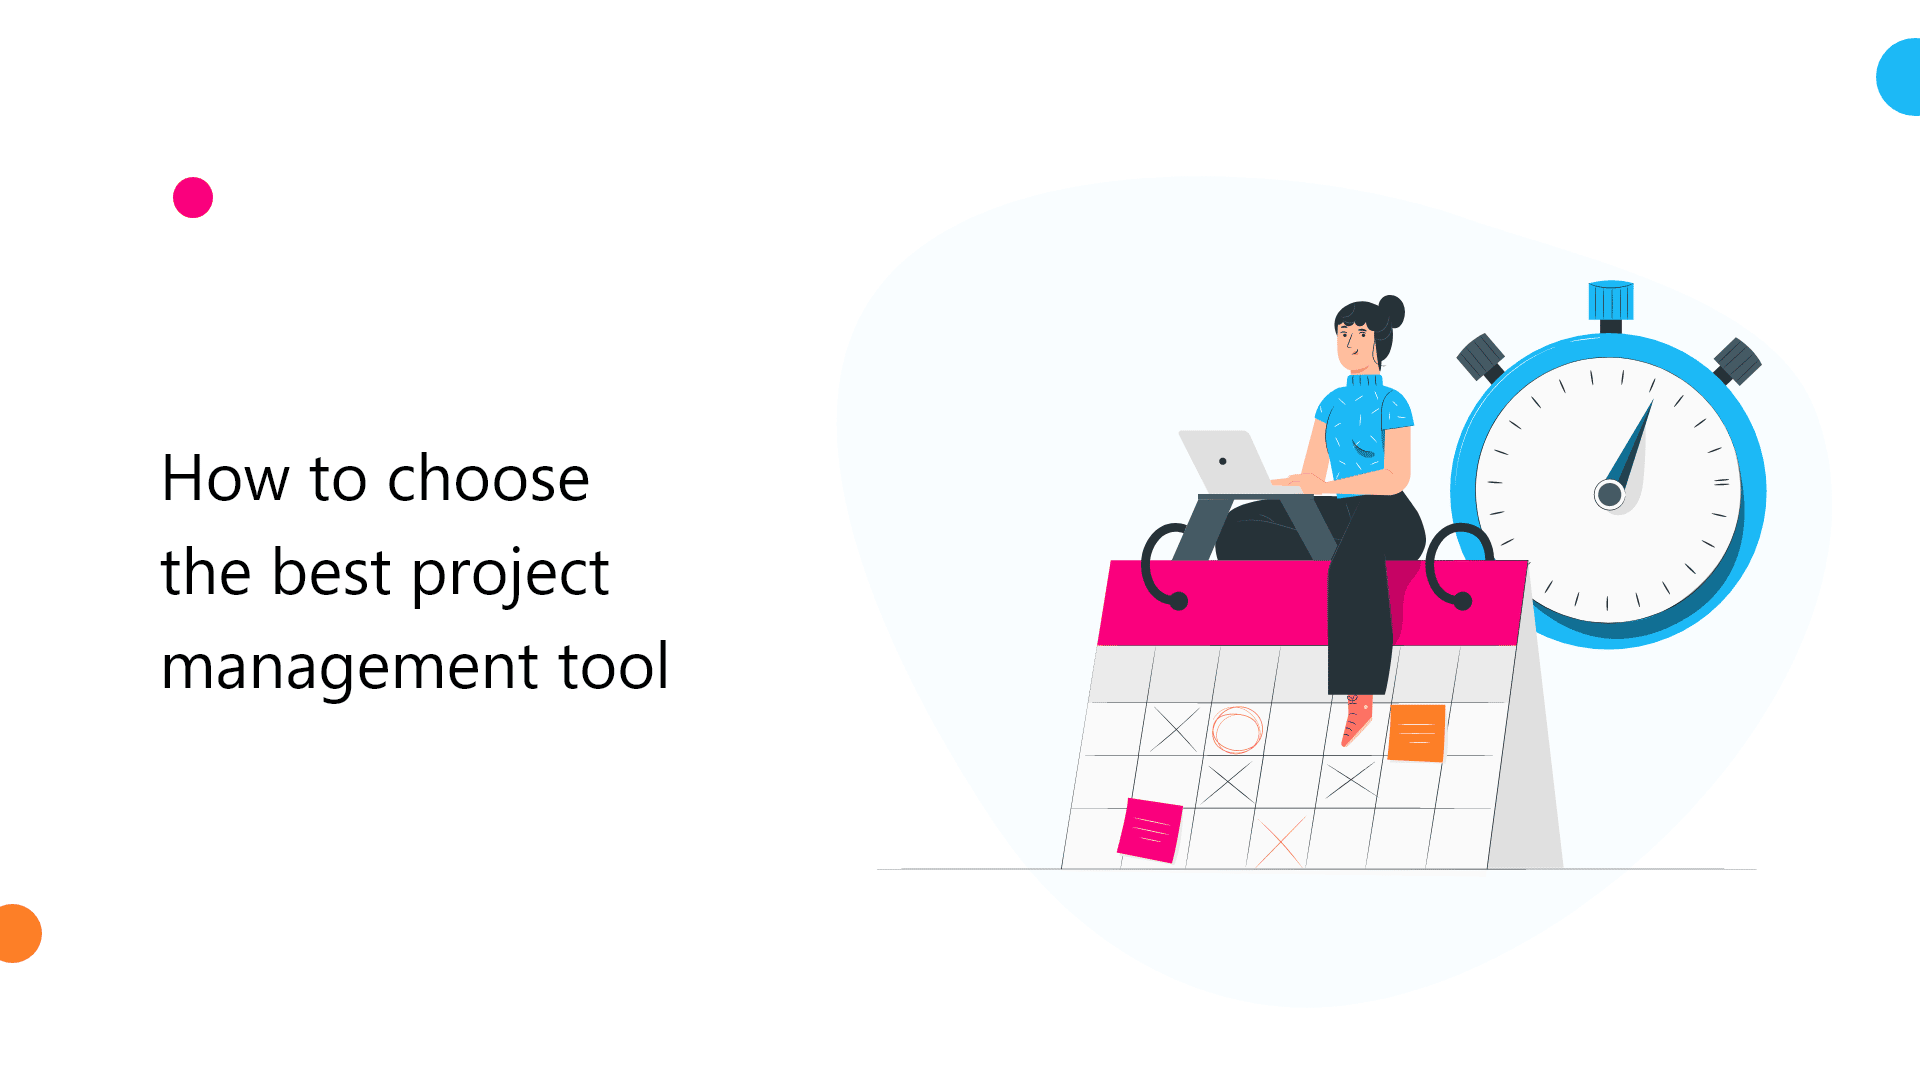 How to choose the best project management tool